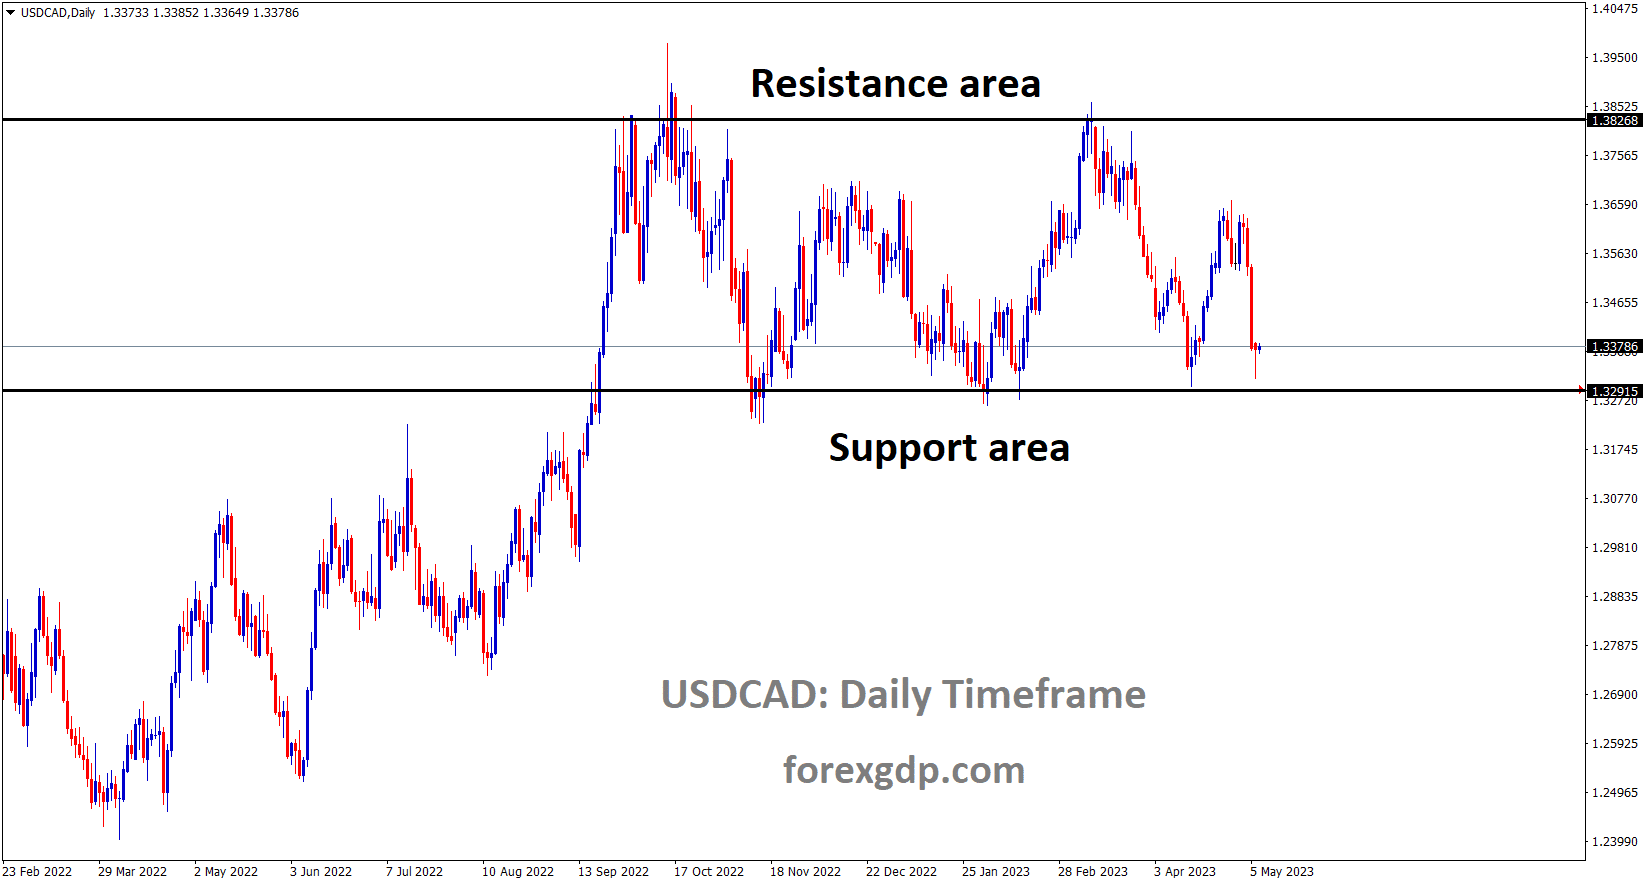 USDCAD is moving in the Box pattern and the market has reached the horizontal support area of the pattern